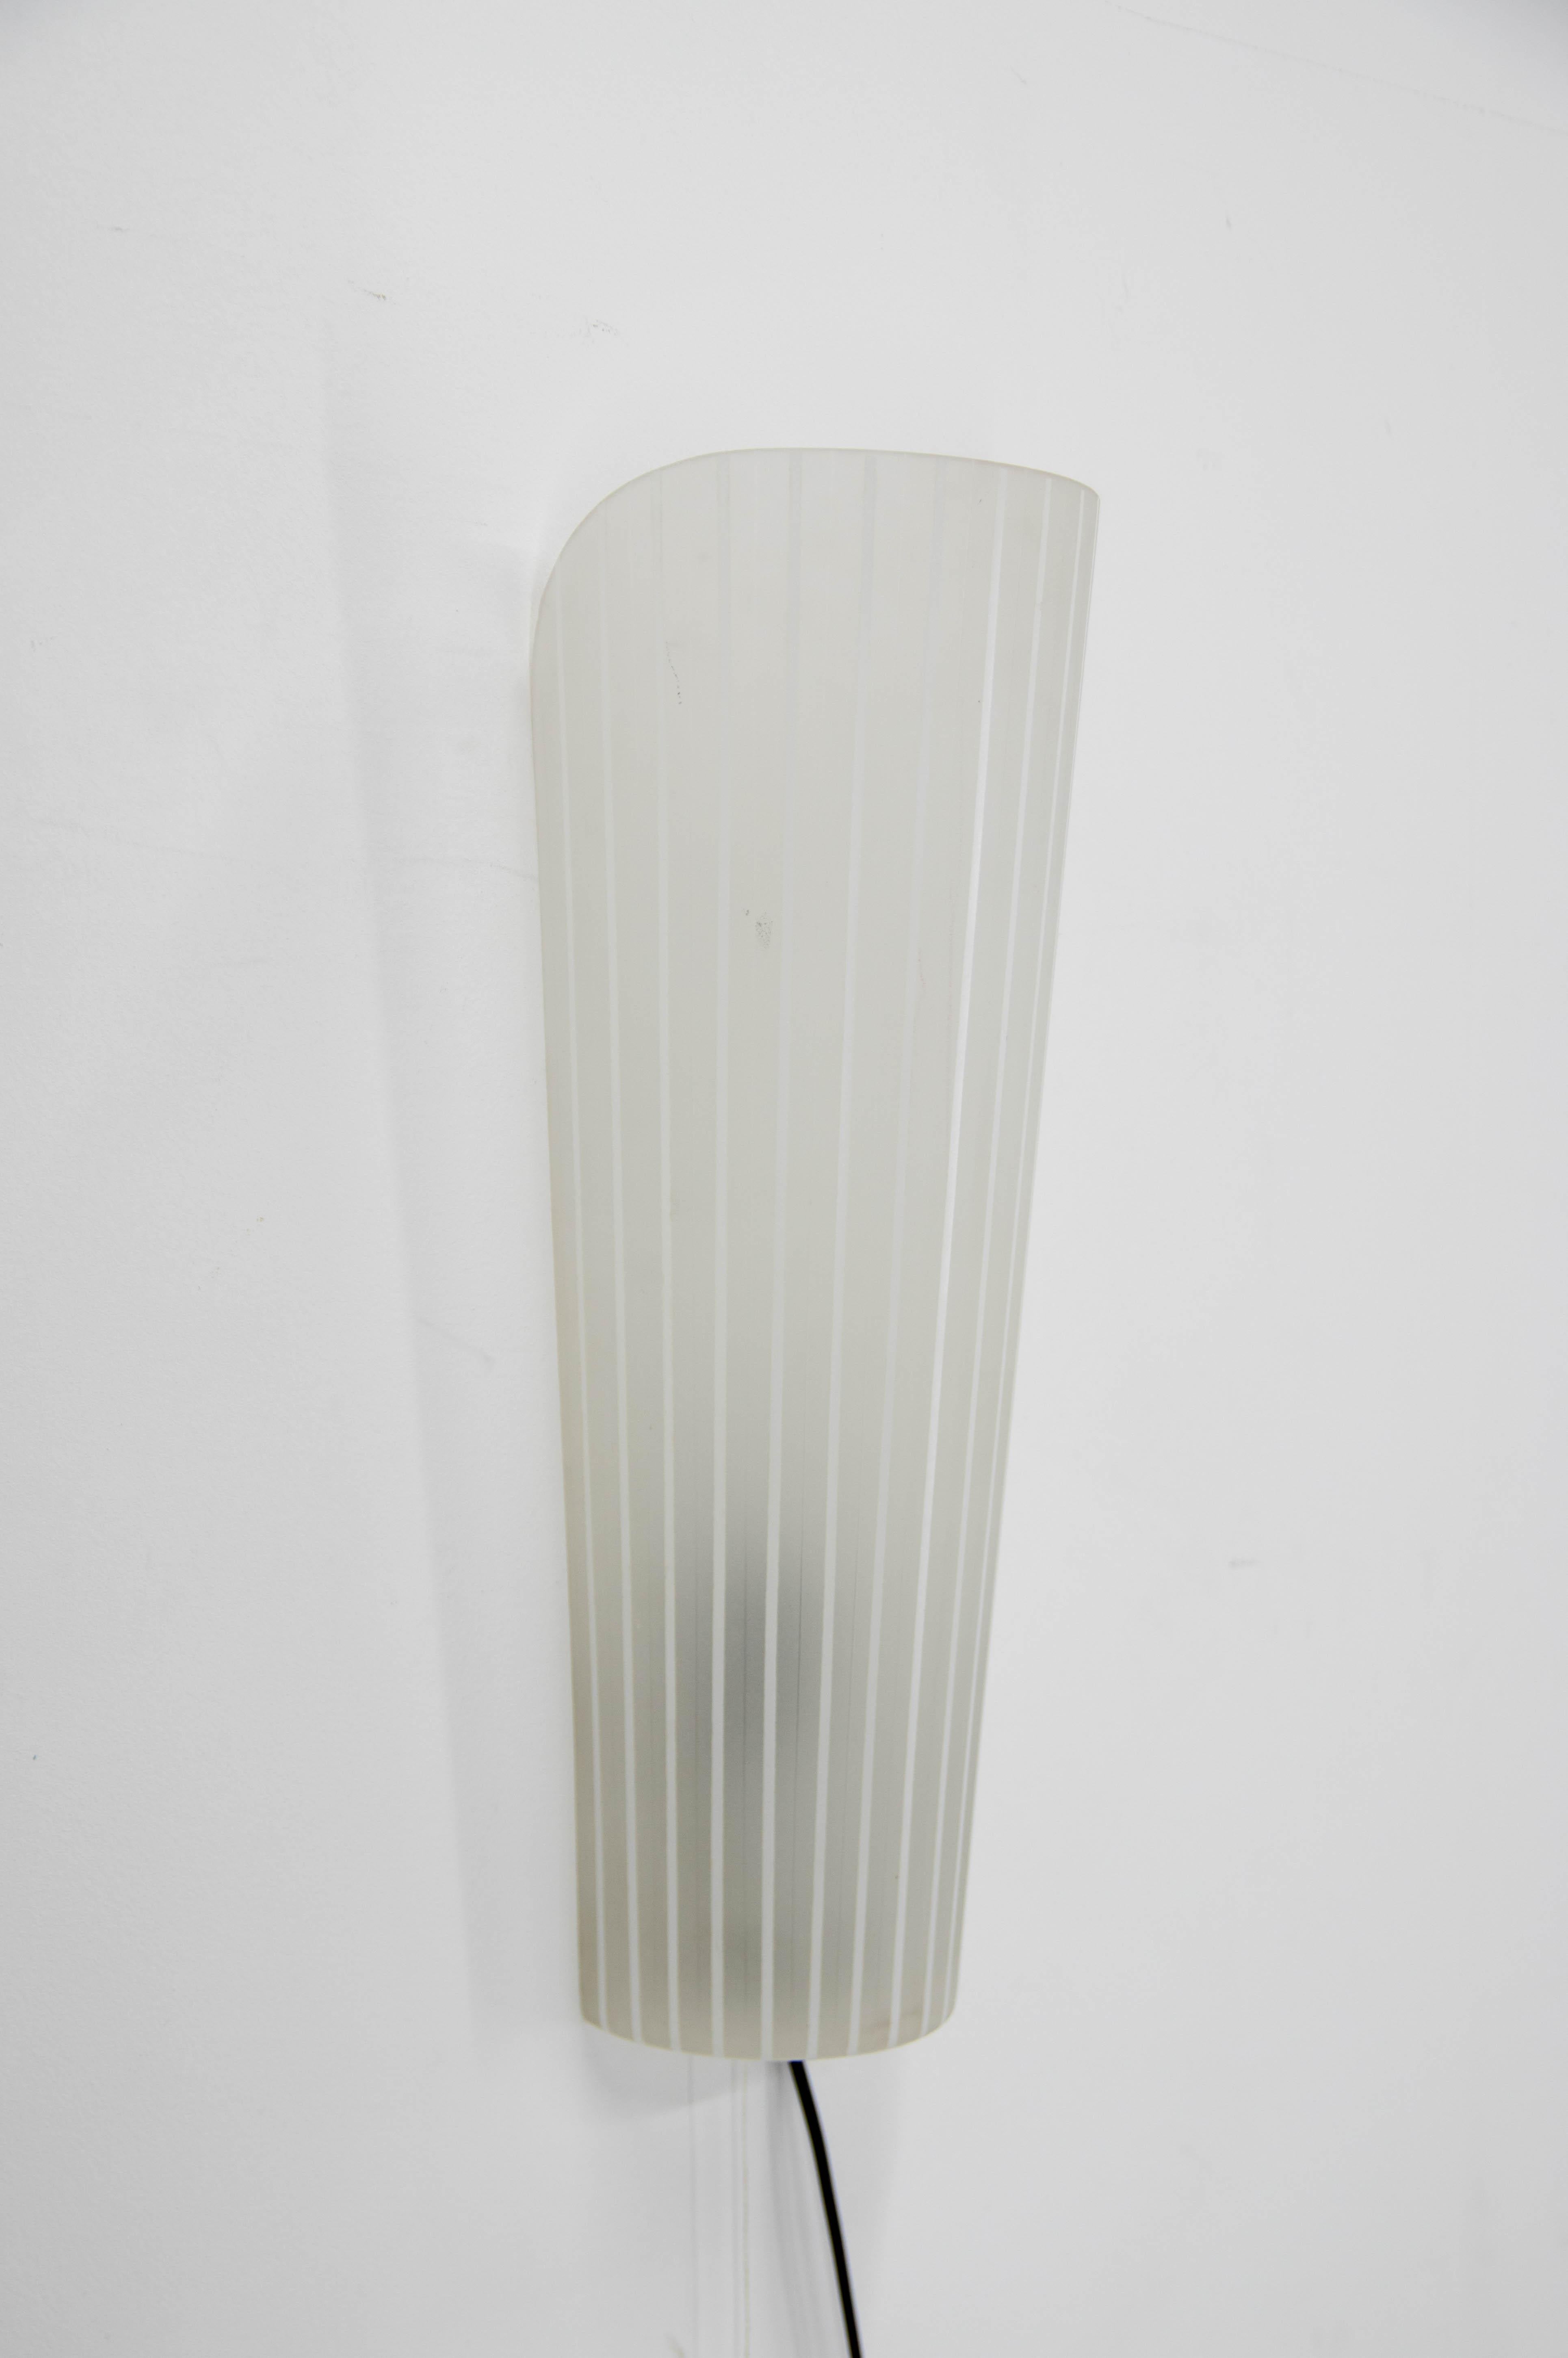 Glass Wall Lamp, Europe, 1970s For Sale 3